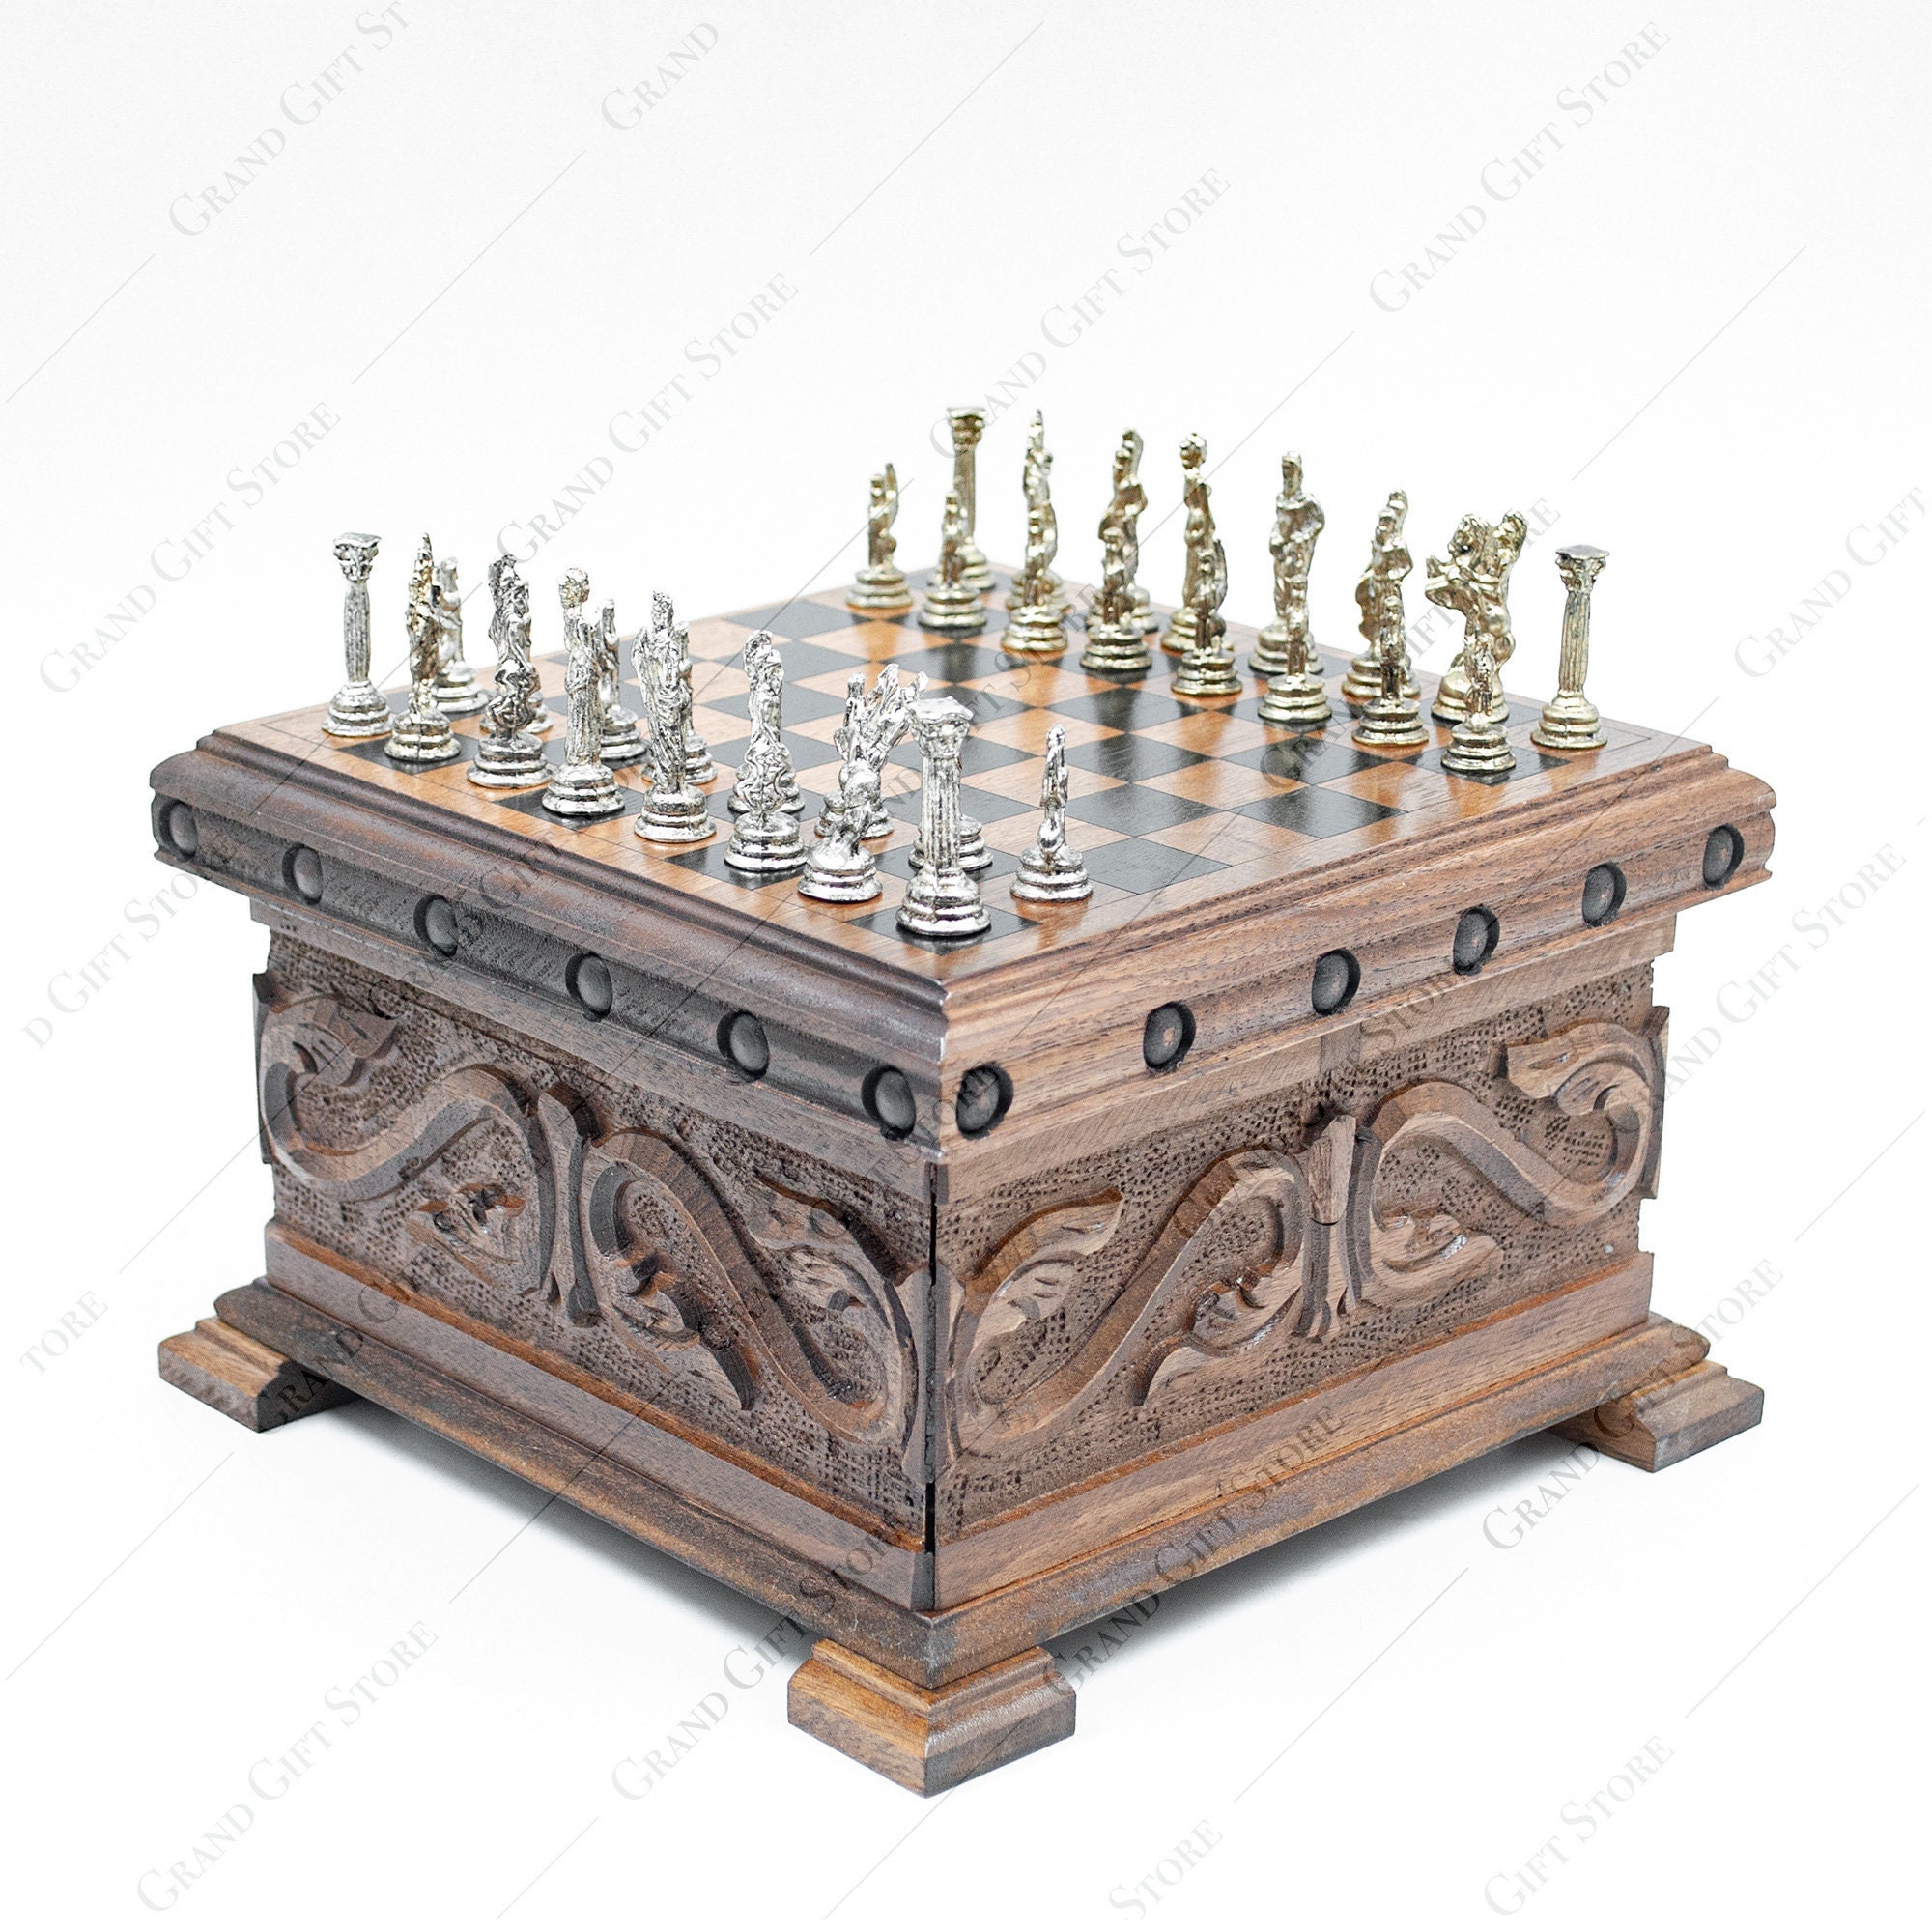 Chess Games With Chess Metal Pieces Wooden Chessboard Gift Box With Luxury  Decorations Interior Decoration Pieces Size 30X30X2.8